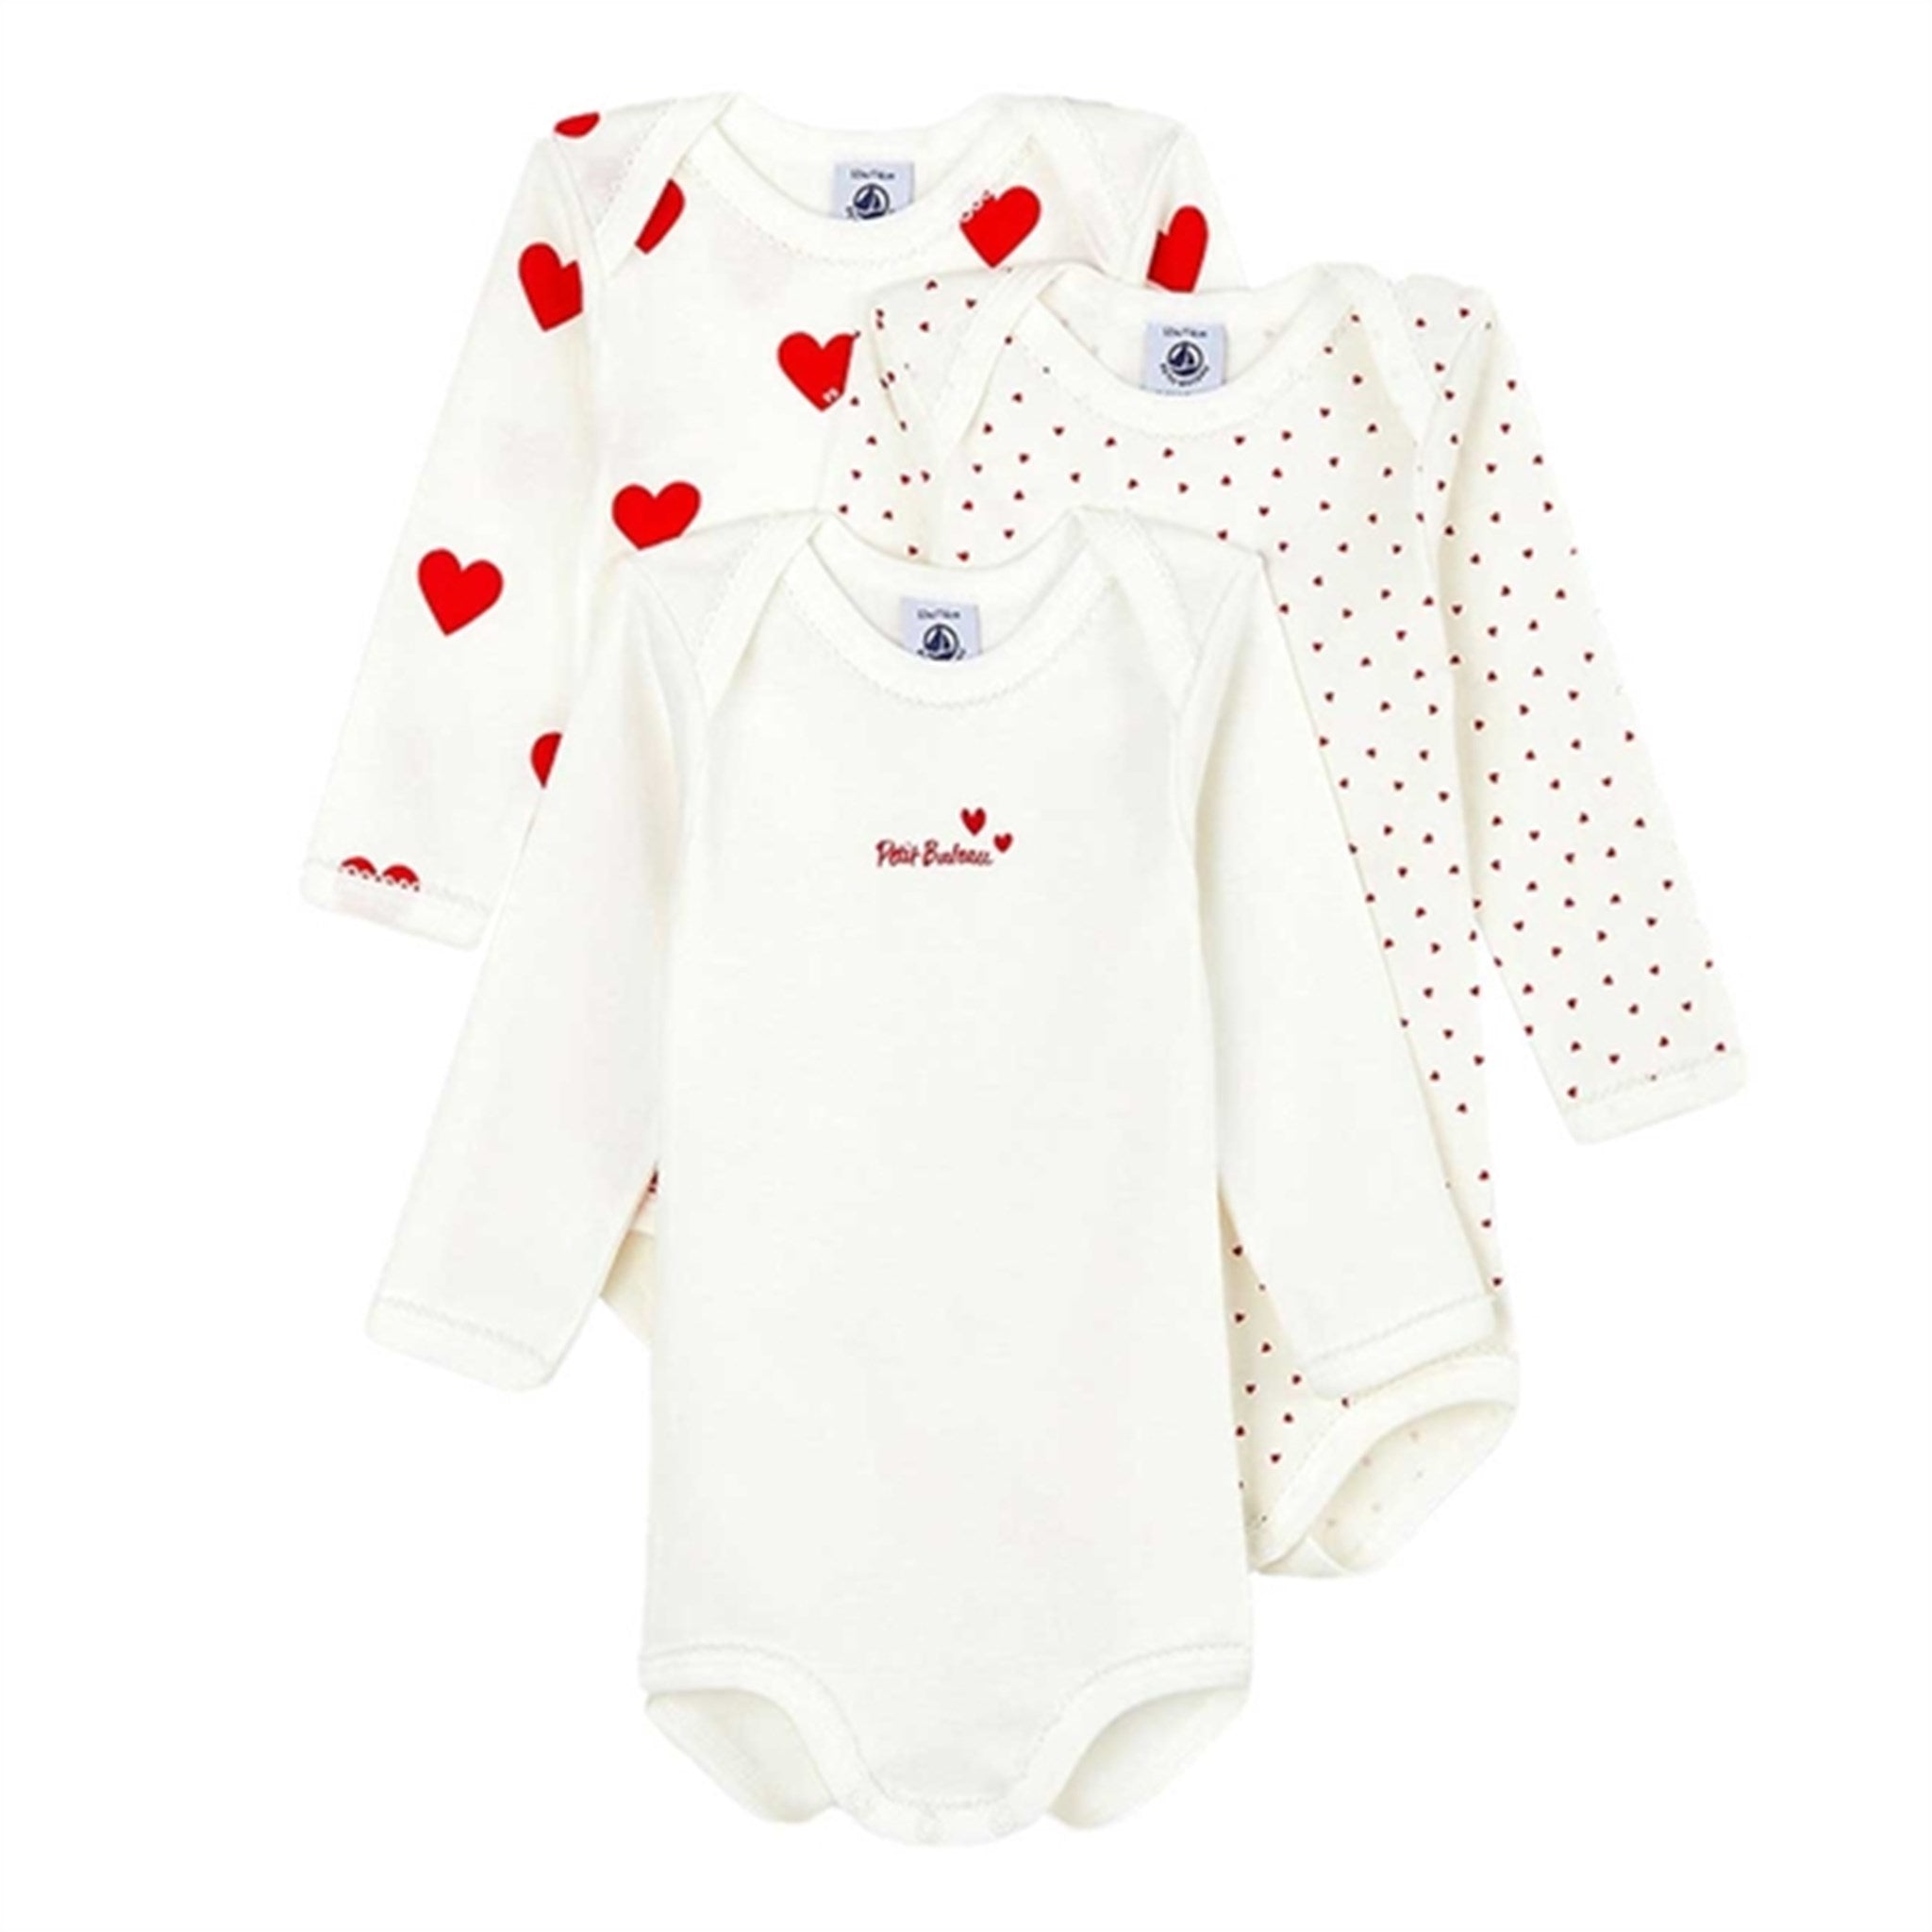 Petit Bateau Body 3-pack White/Red Hearts